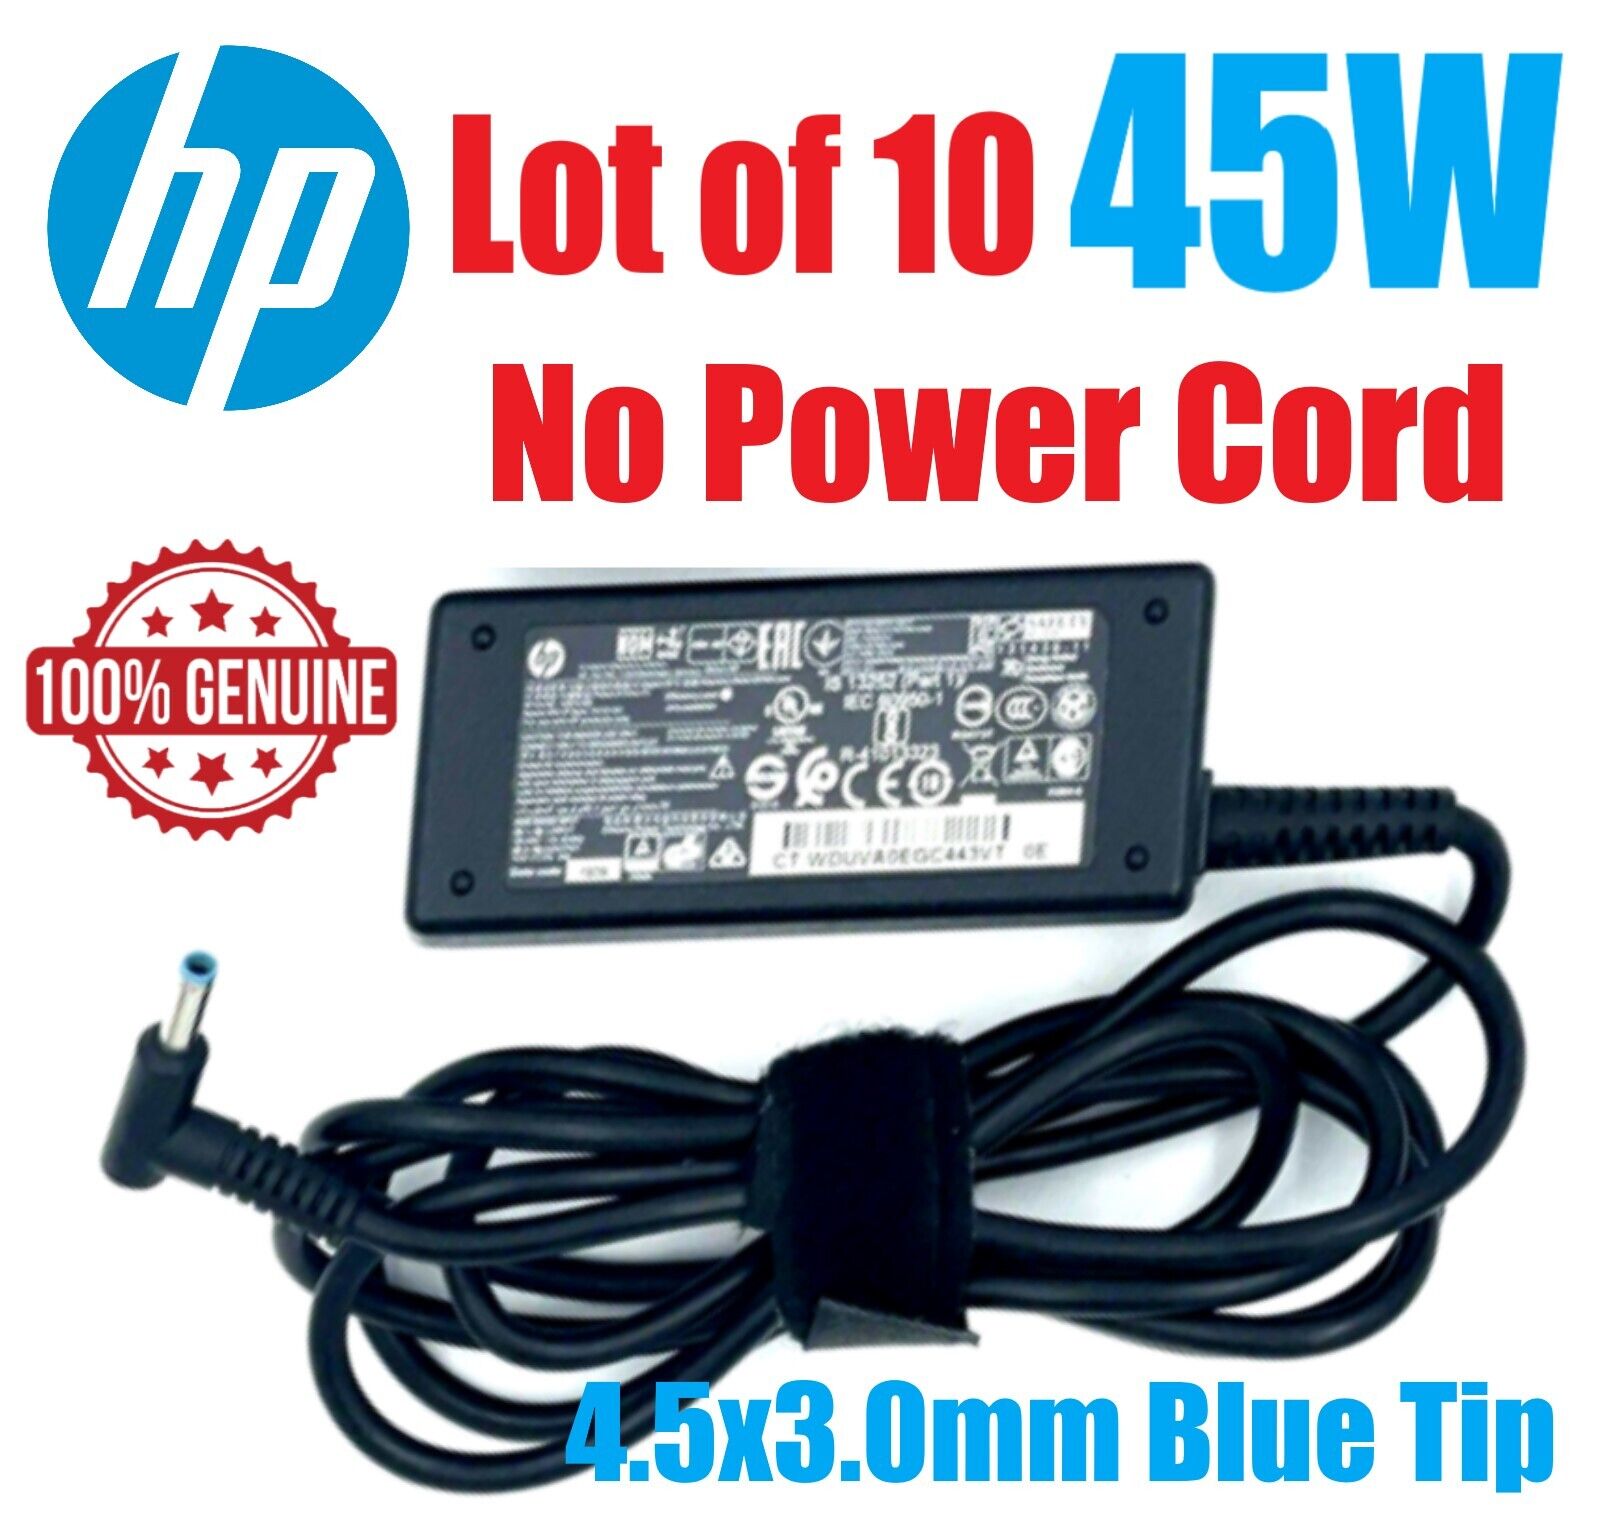 LOT of 10 OEM HP Laptop AC Adapter Charger 741727-001 45W Blue Tip No Power Cord